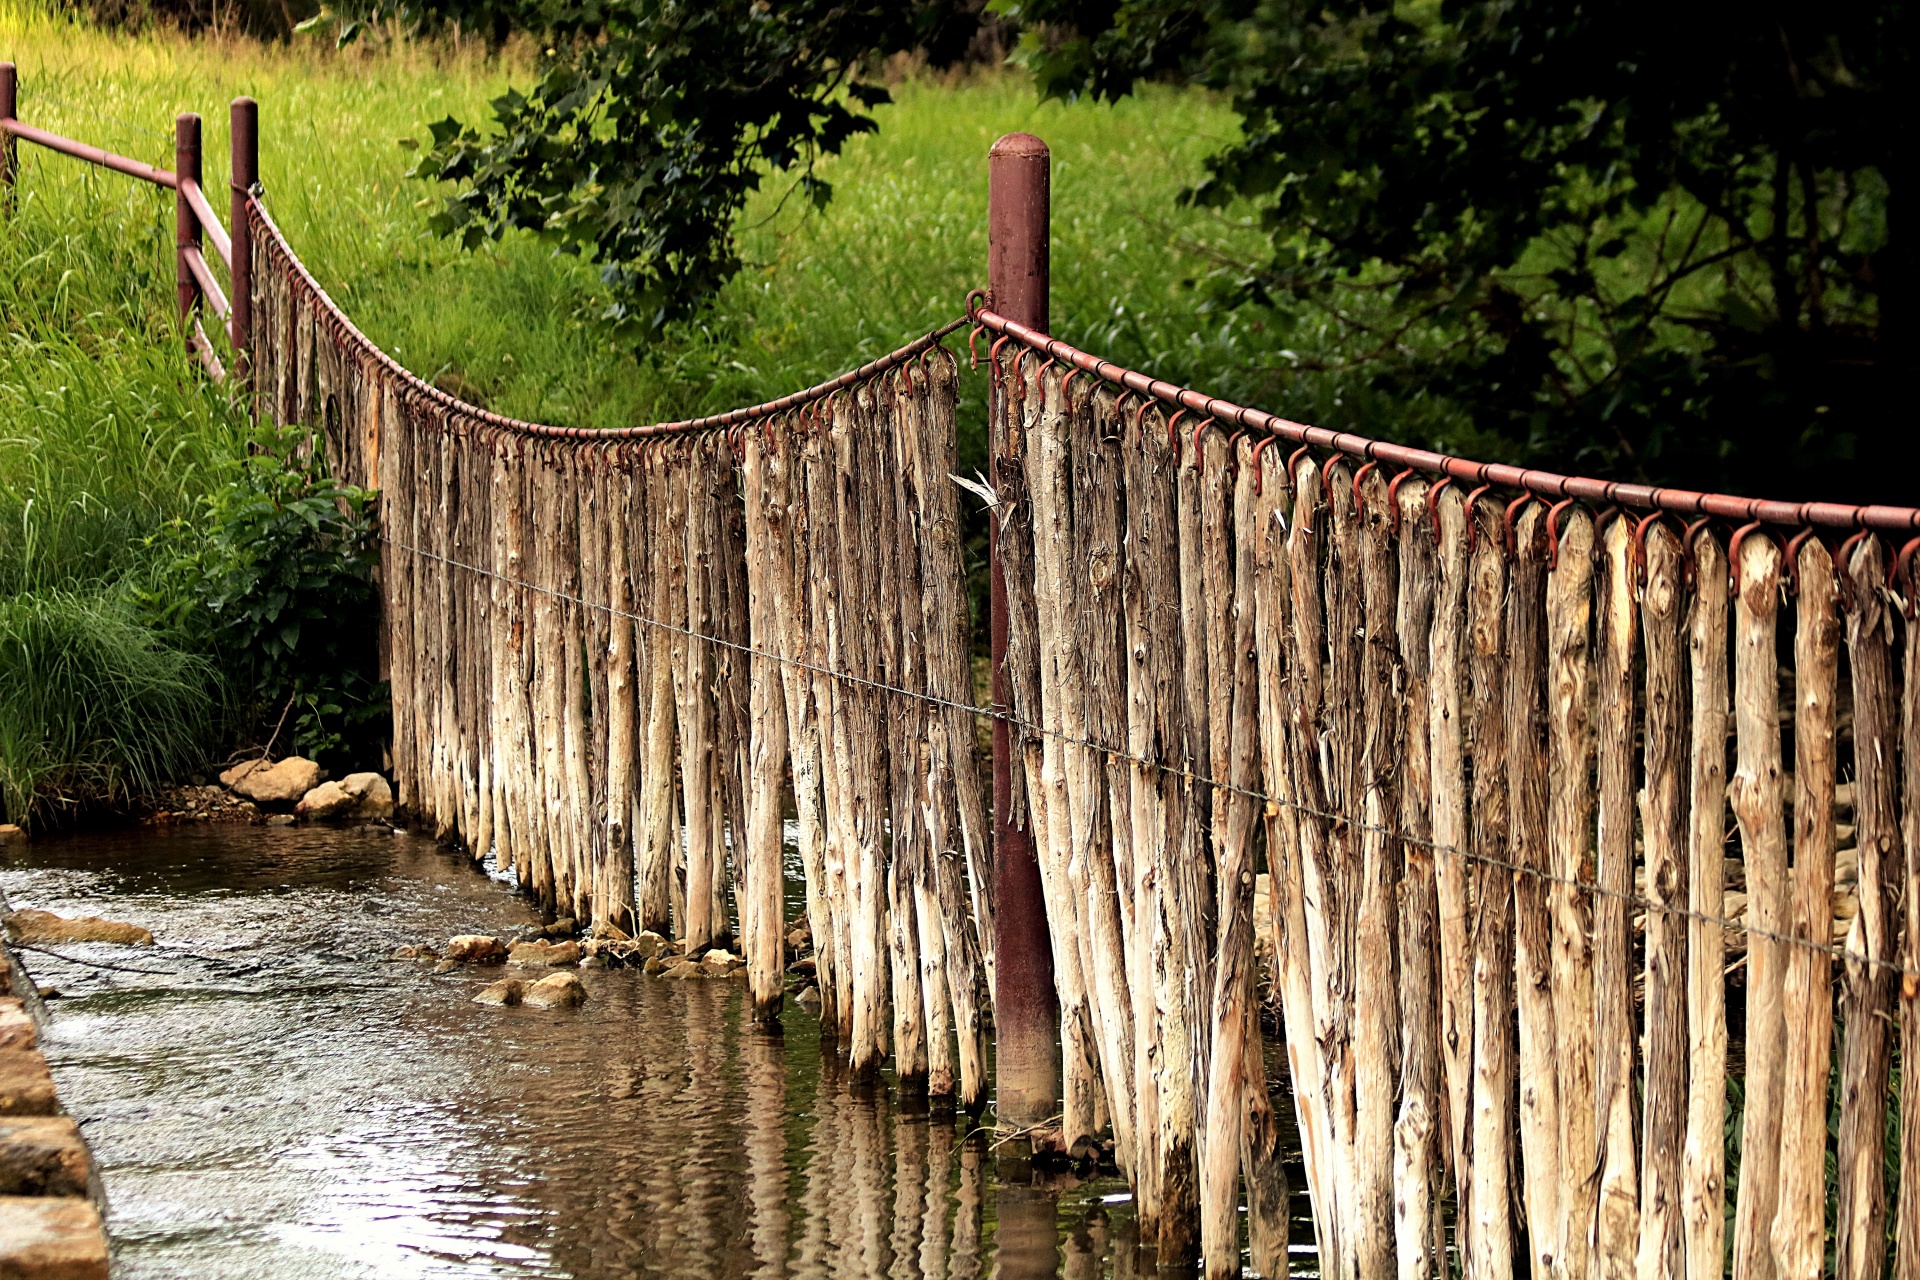 A fence made of cedar trees hangs across a small creek at the edge of the woods.